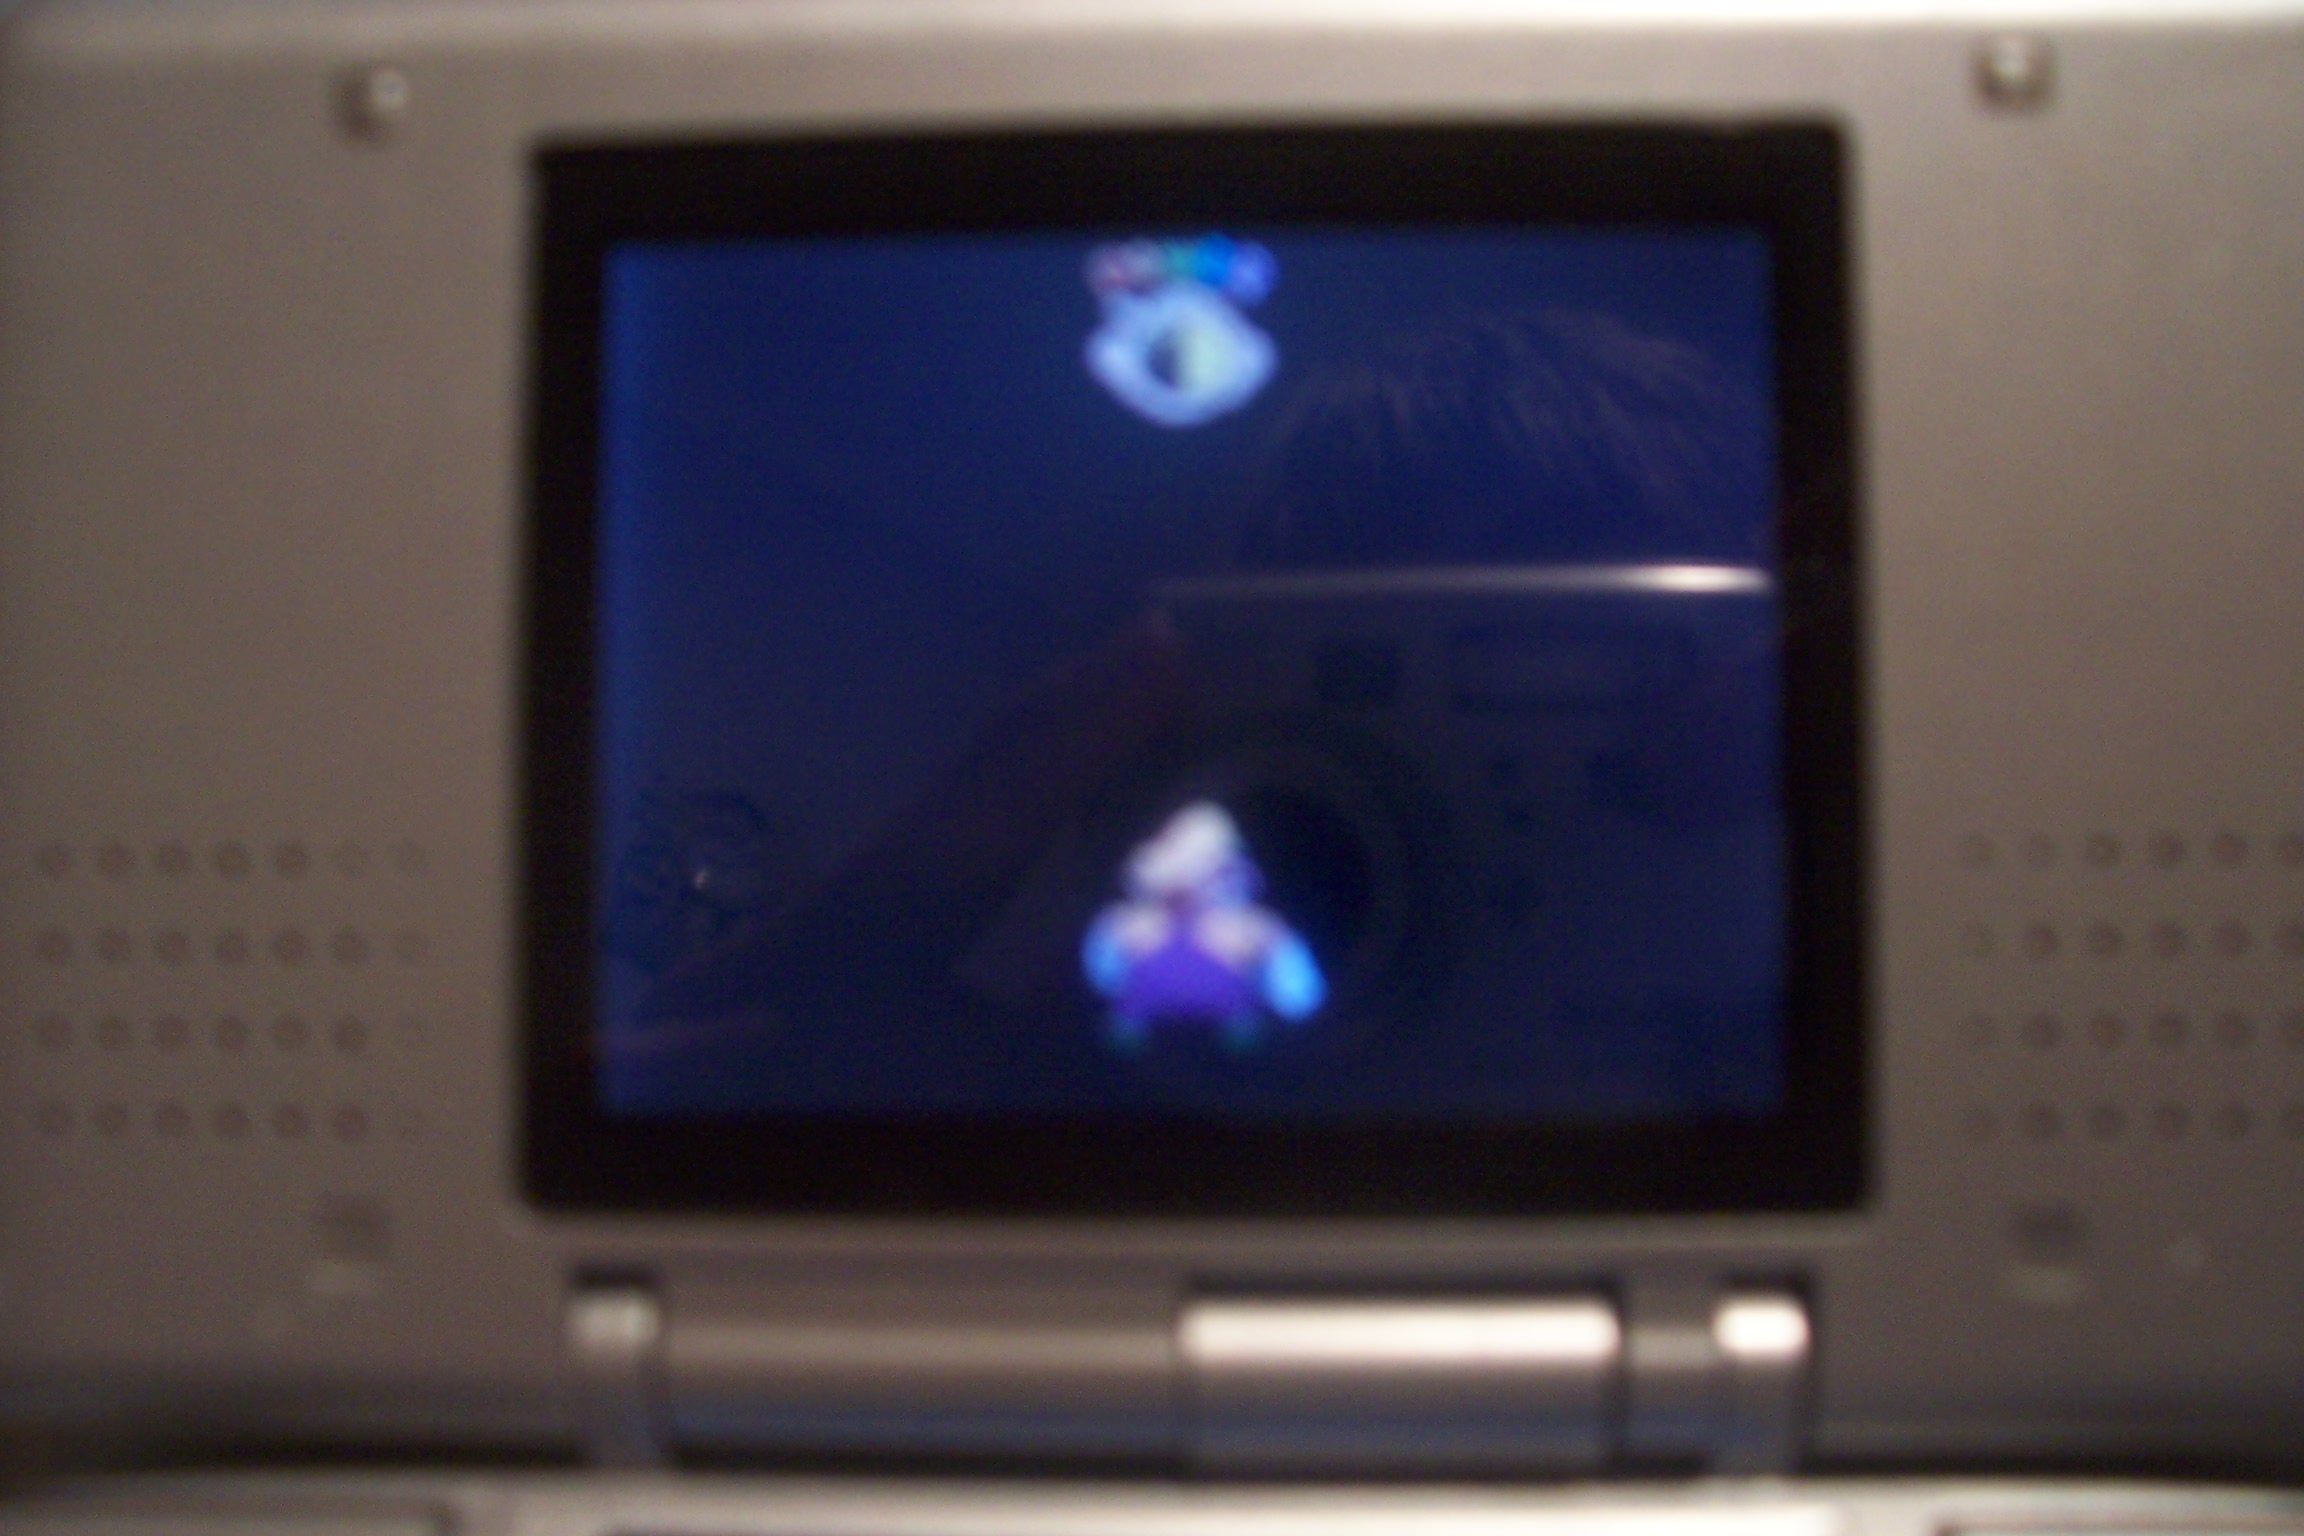 Snaking in F-Zero GX was a glitch like the dark room of death in Super Mario 64 DS shown here.